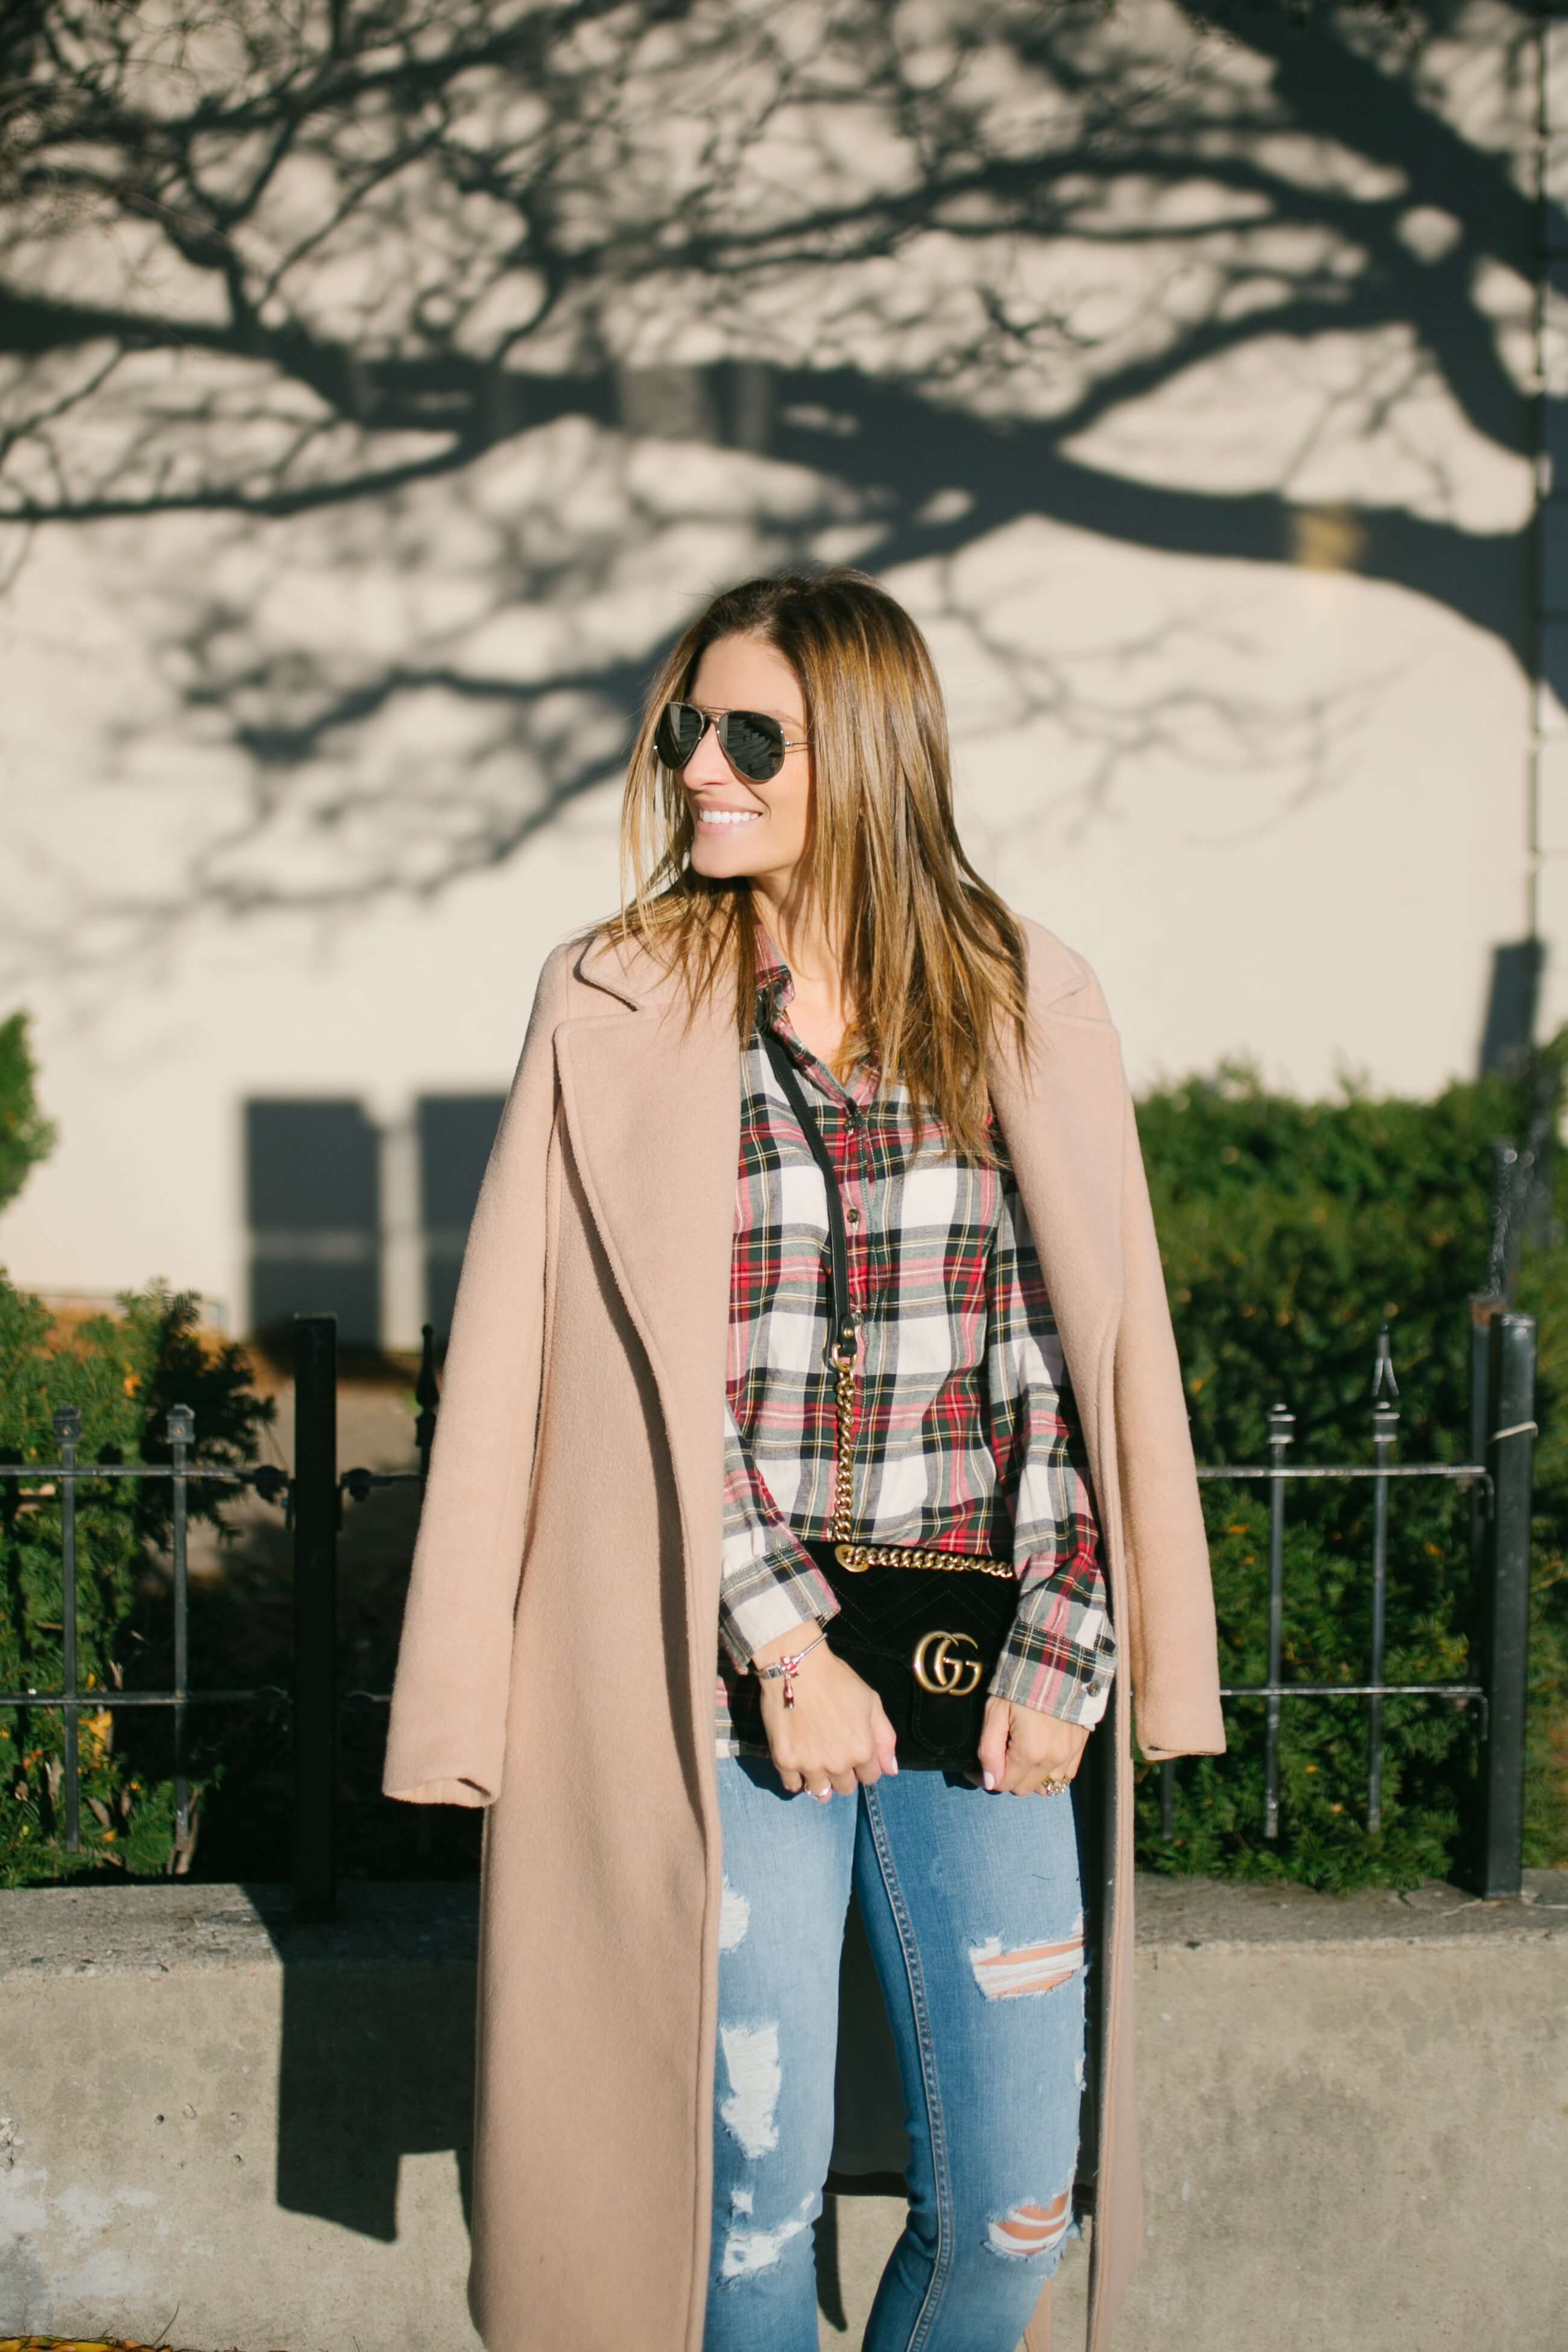 layered look for winter -plaid shirt, camel coat, velvet gucci bag, ripped jeans, suede booties sparkleshinylove mandy furnis